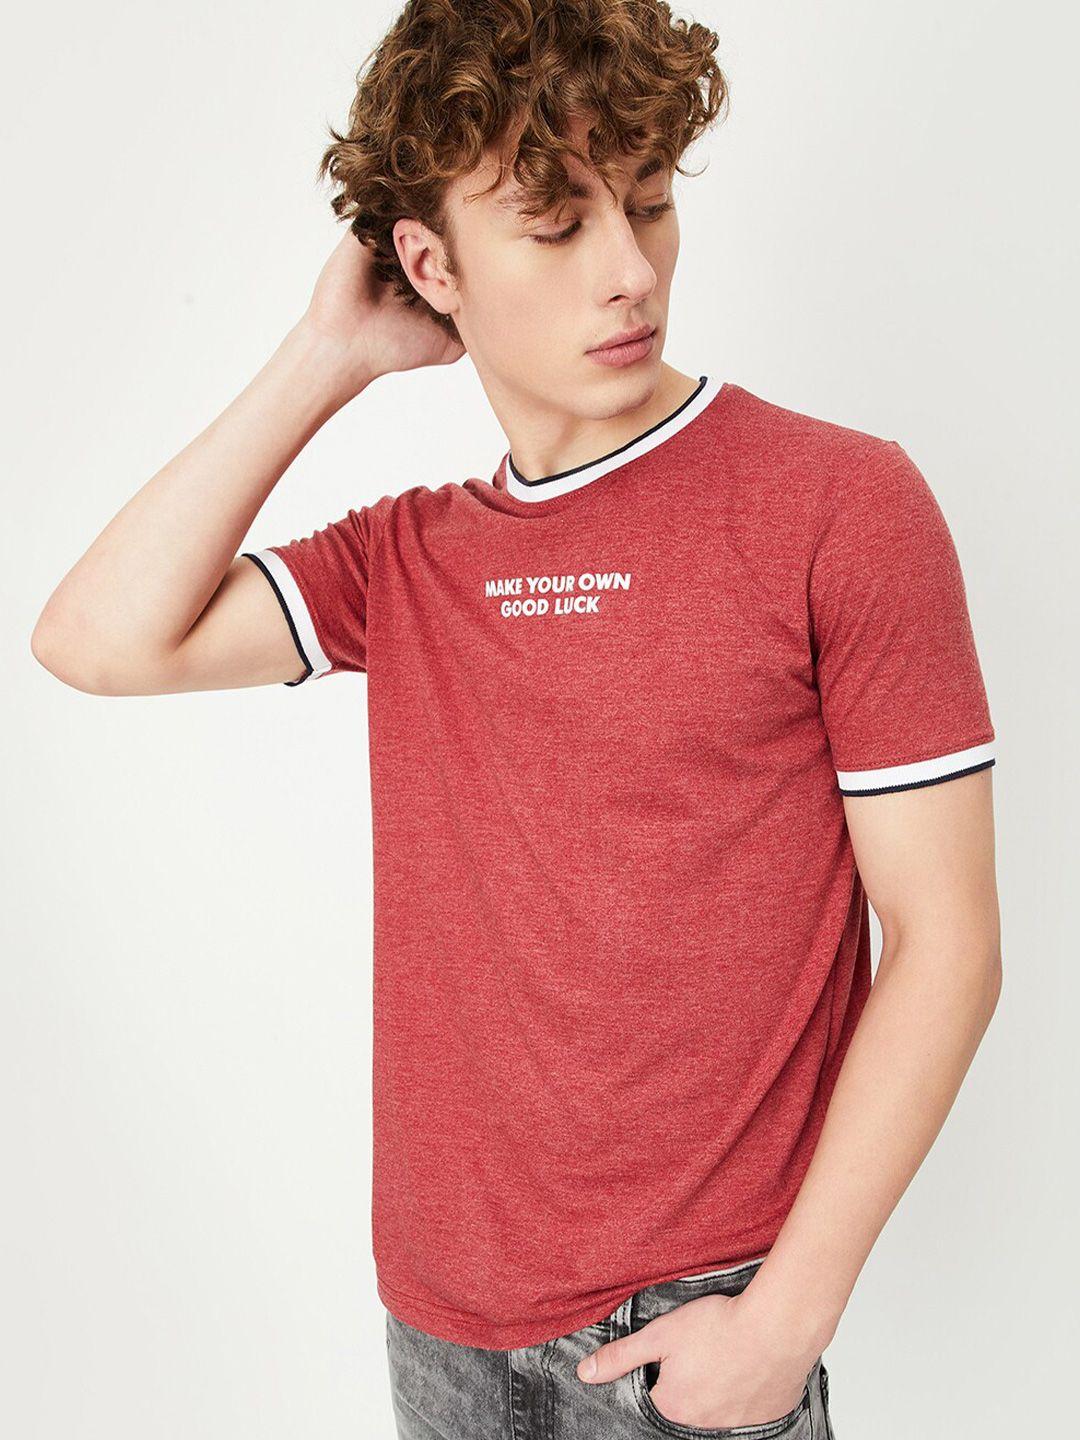 max typography printed casual t-shirt